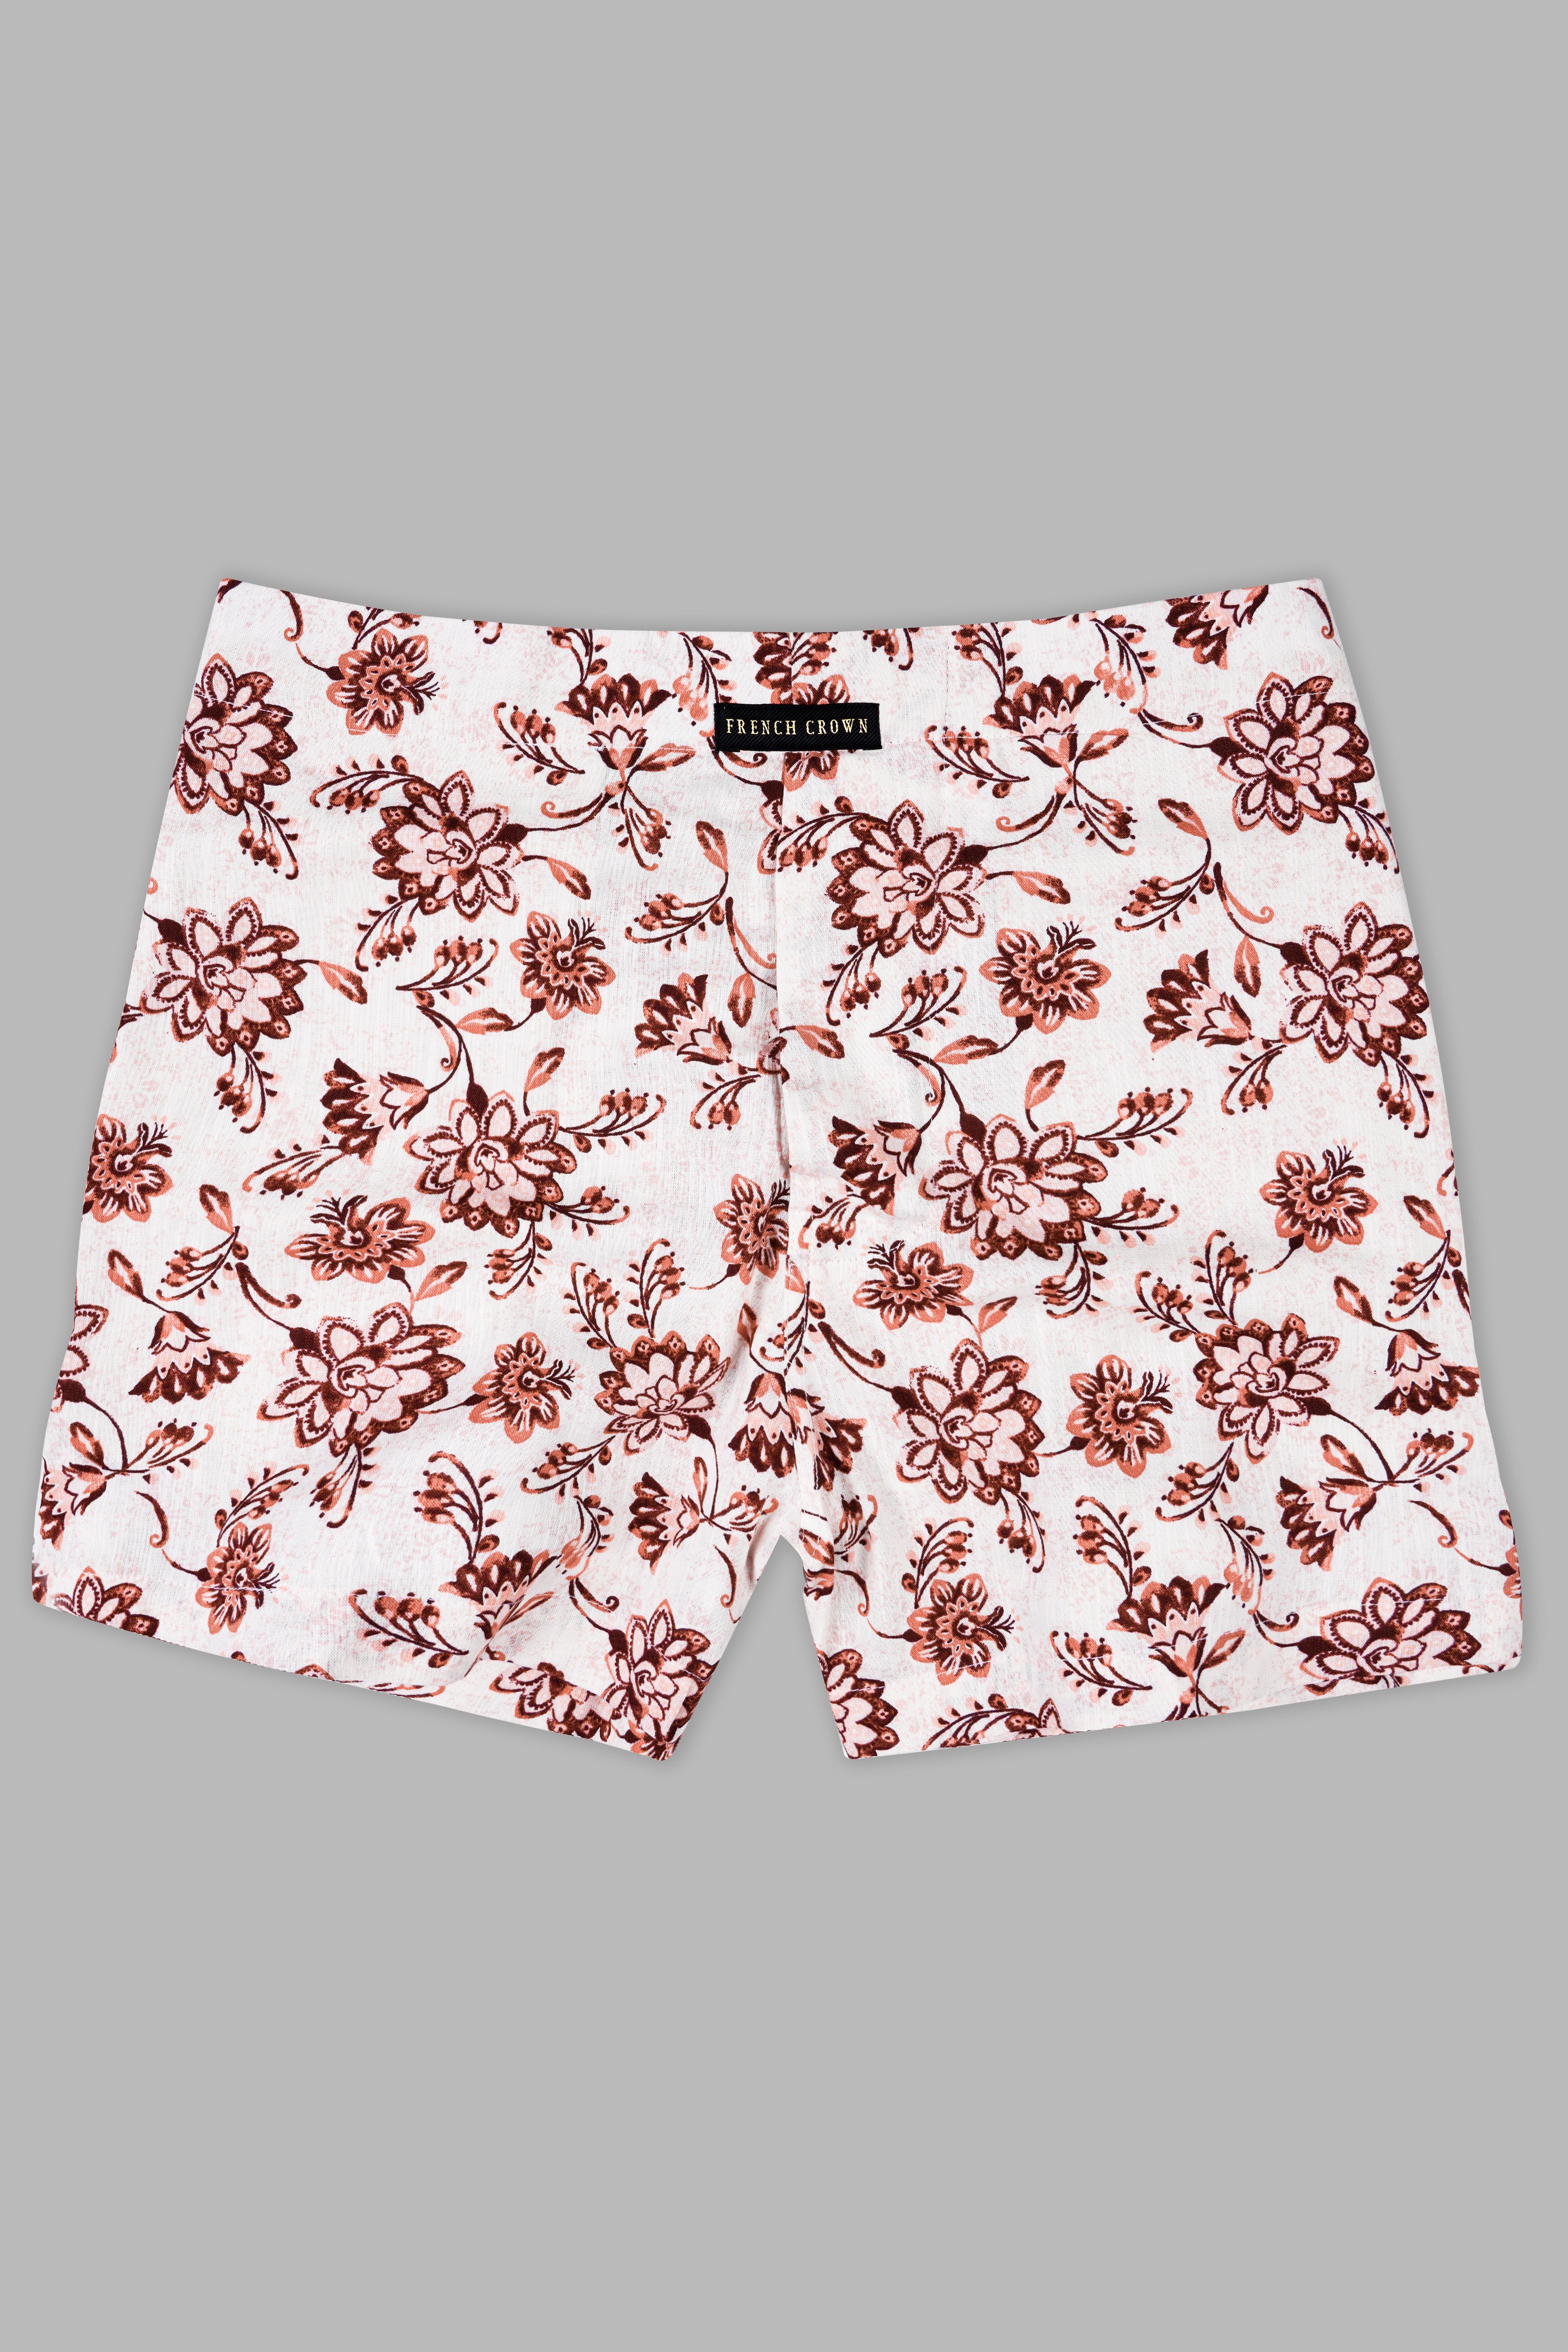 Nebula Cream And Mule Fawn Brown Floral Printed Luxurious Linen Boxer